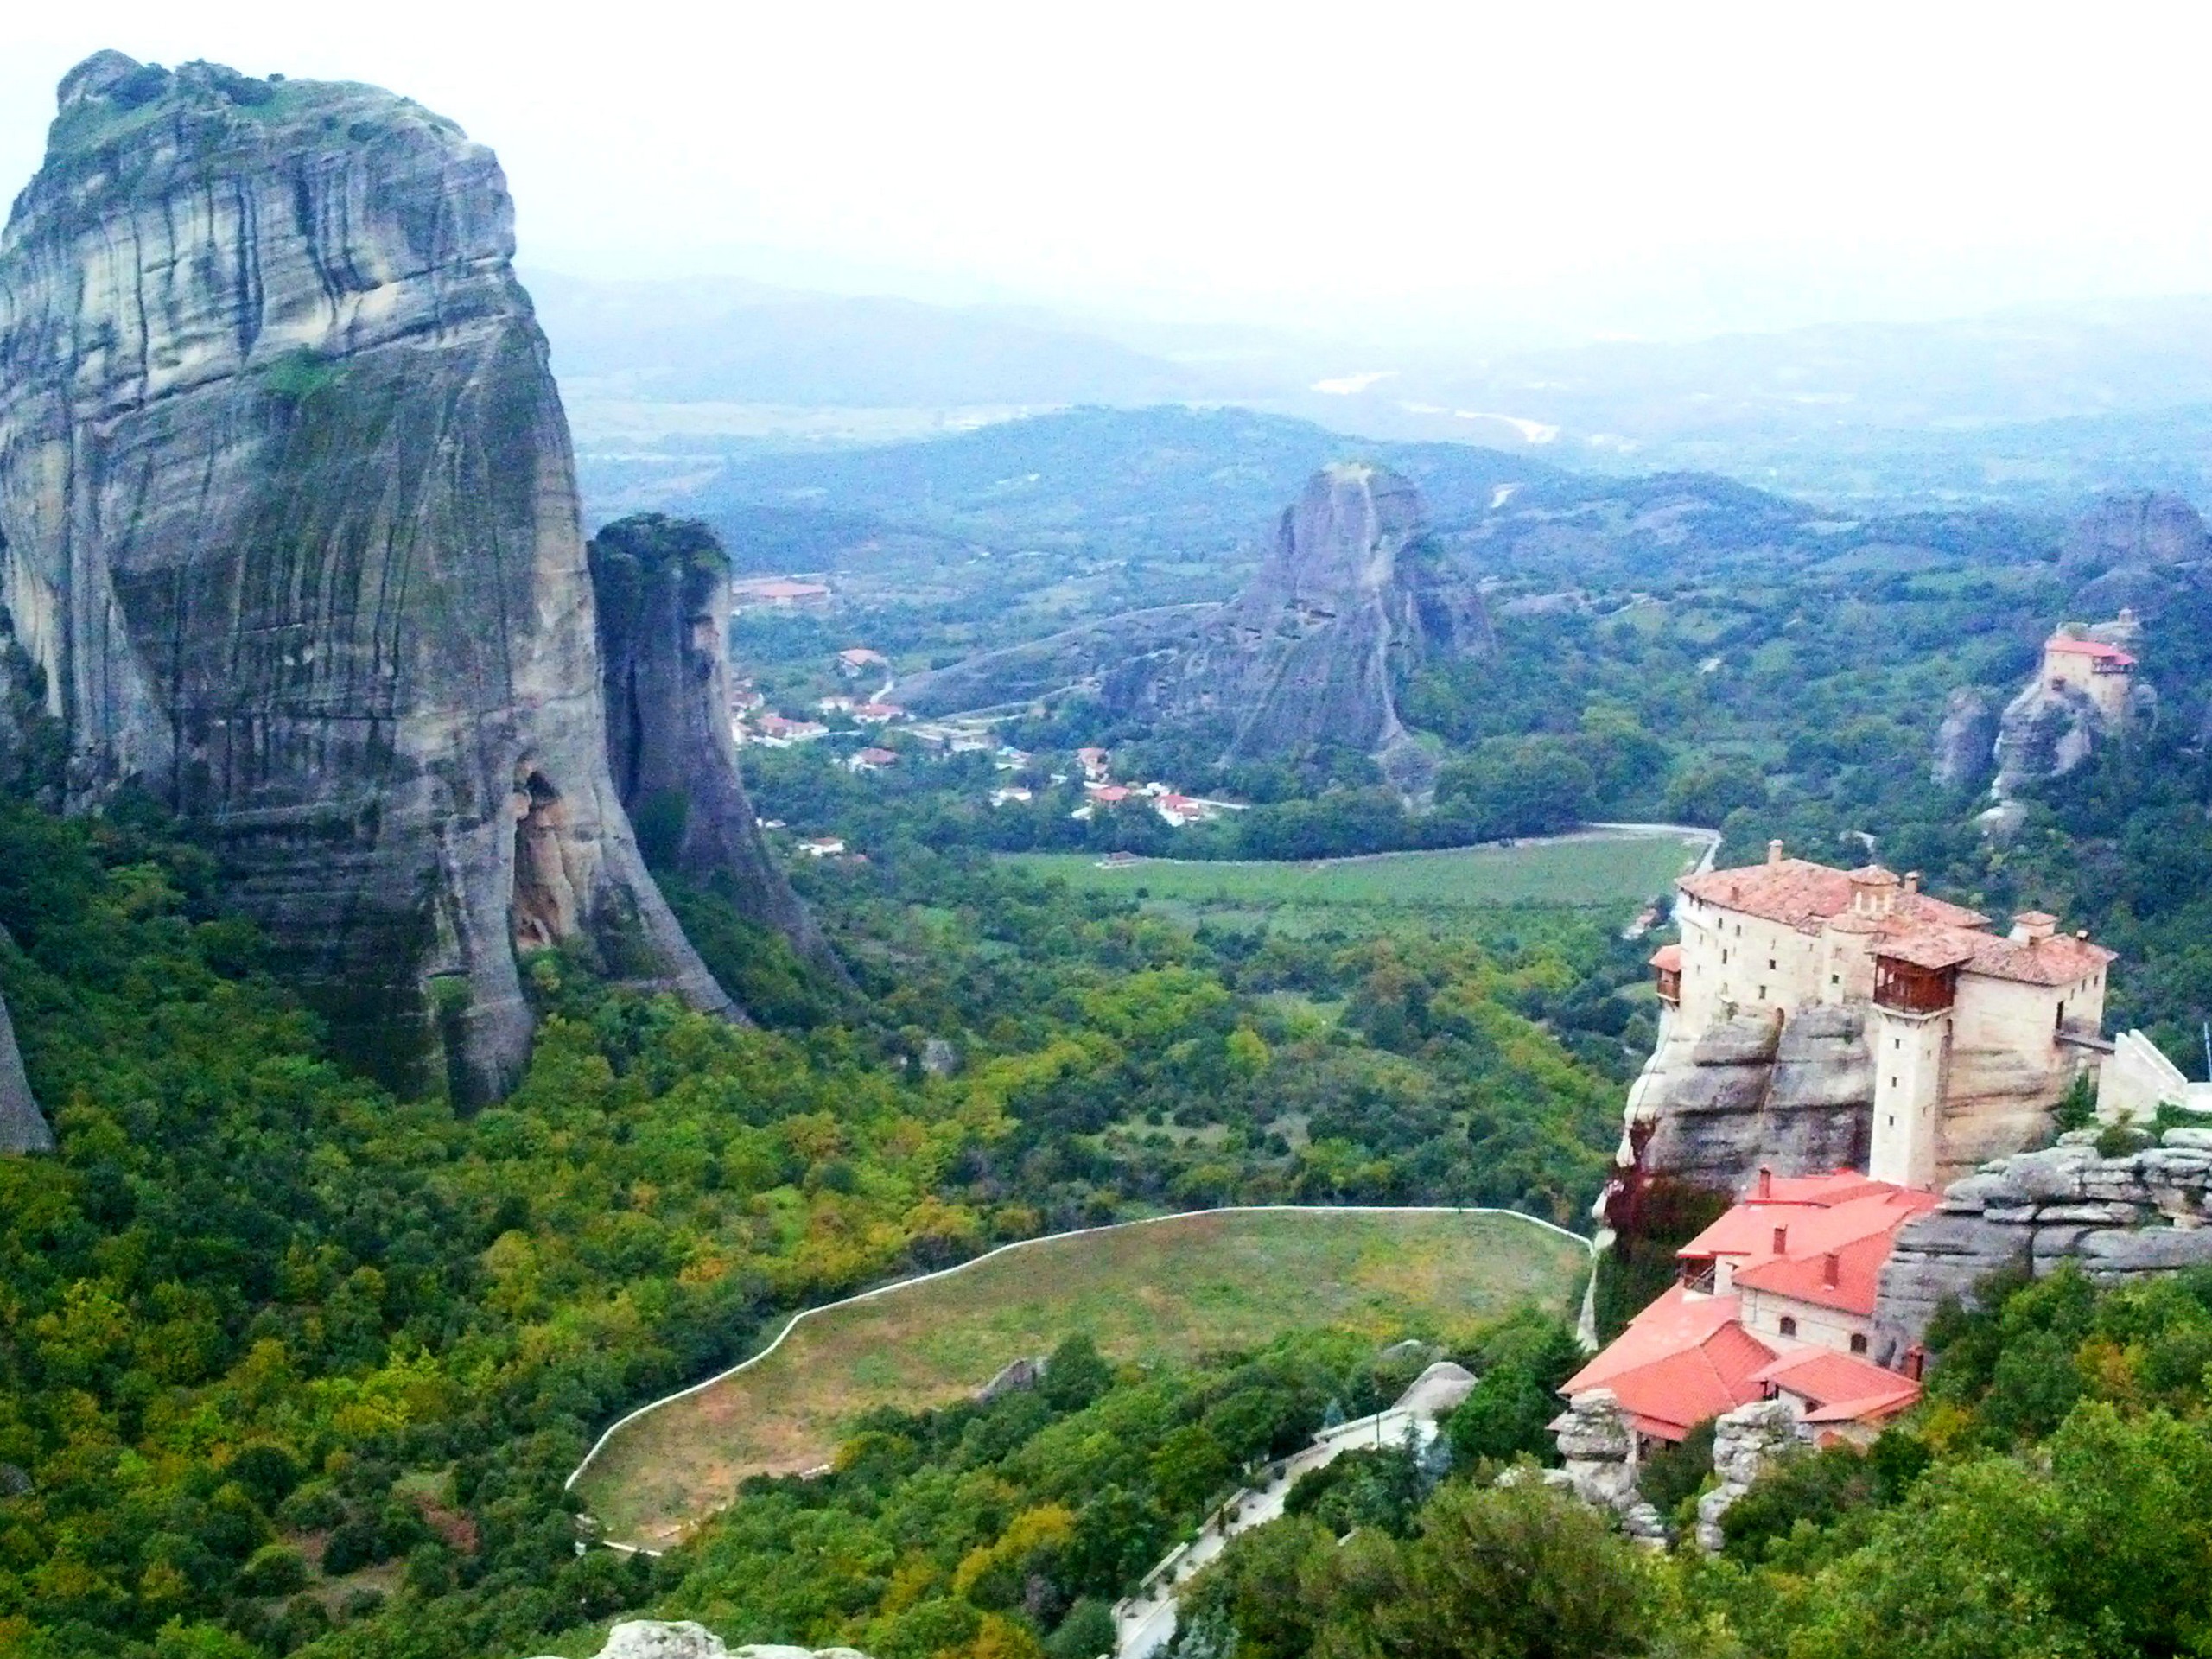 Meteora monastery with a wide valley view below